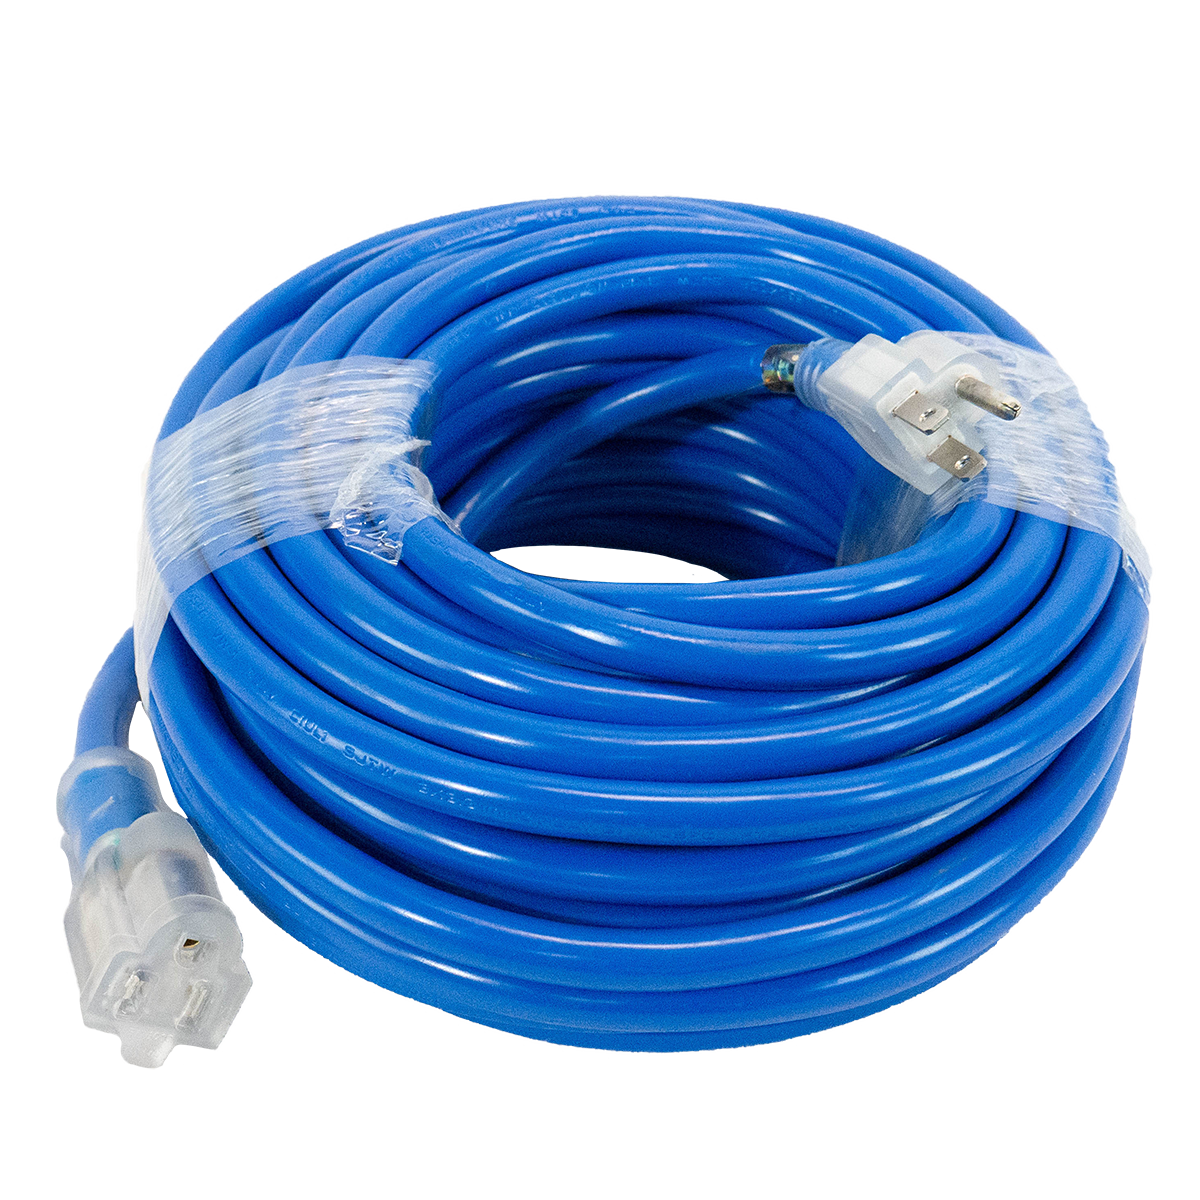 Lighted Power Cord - 50ft